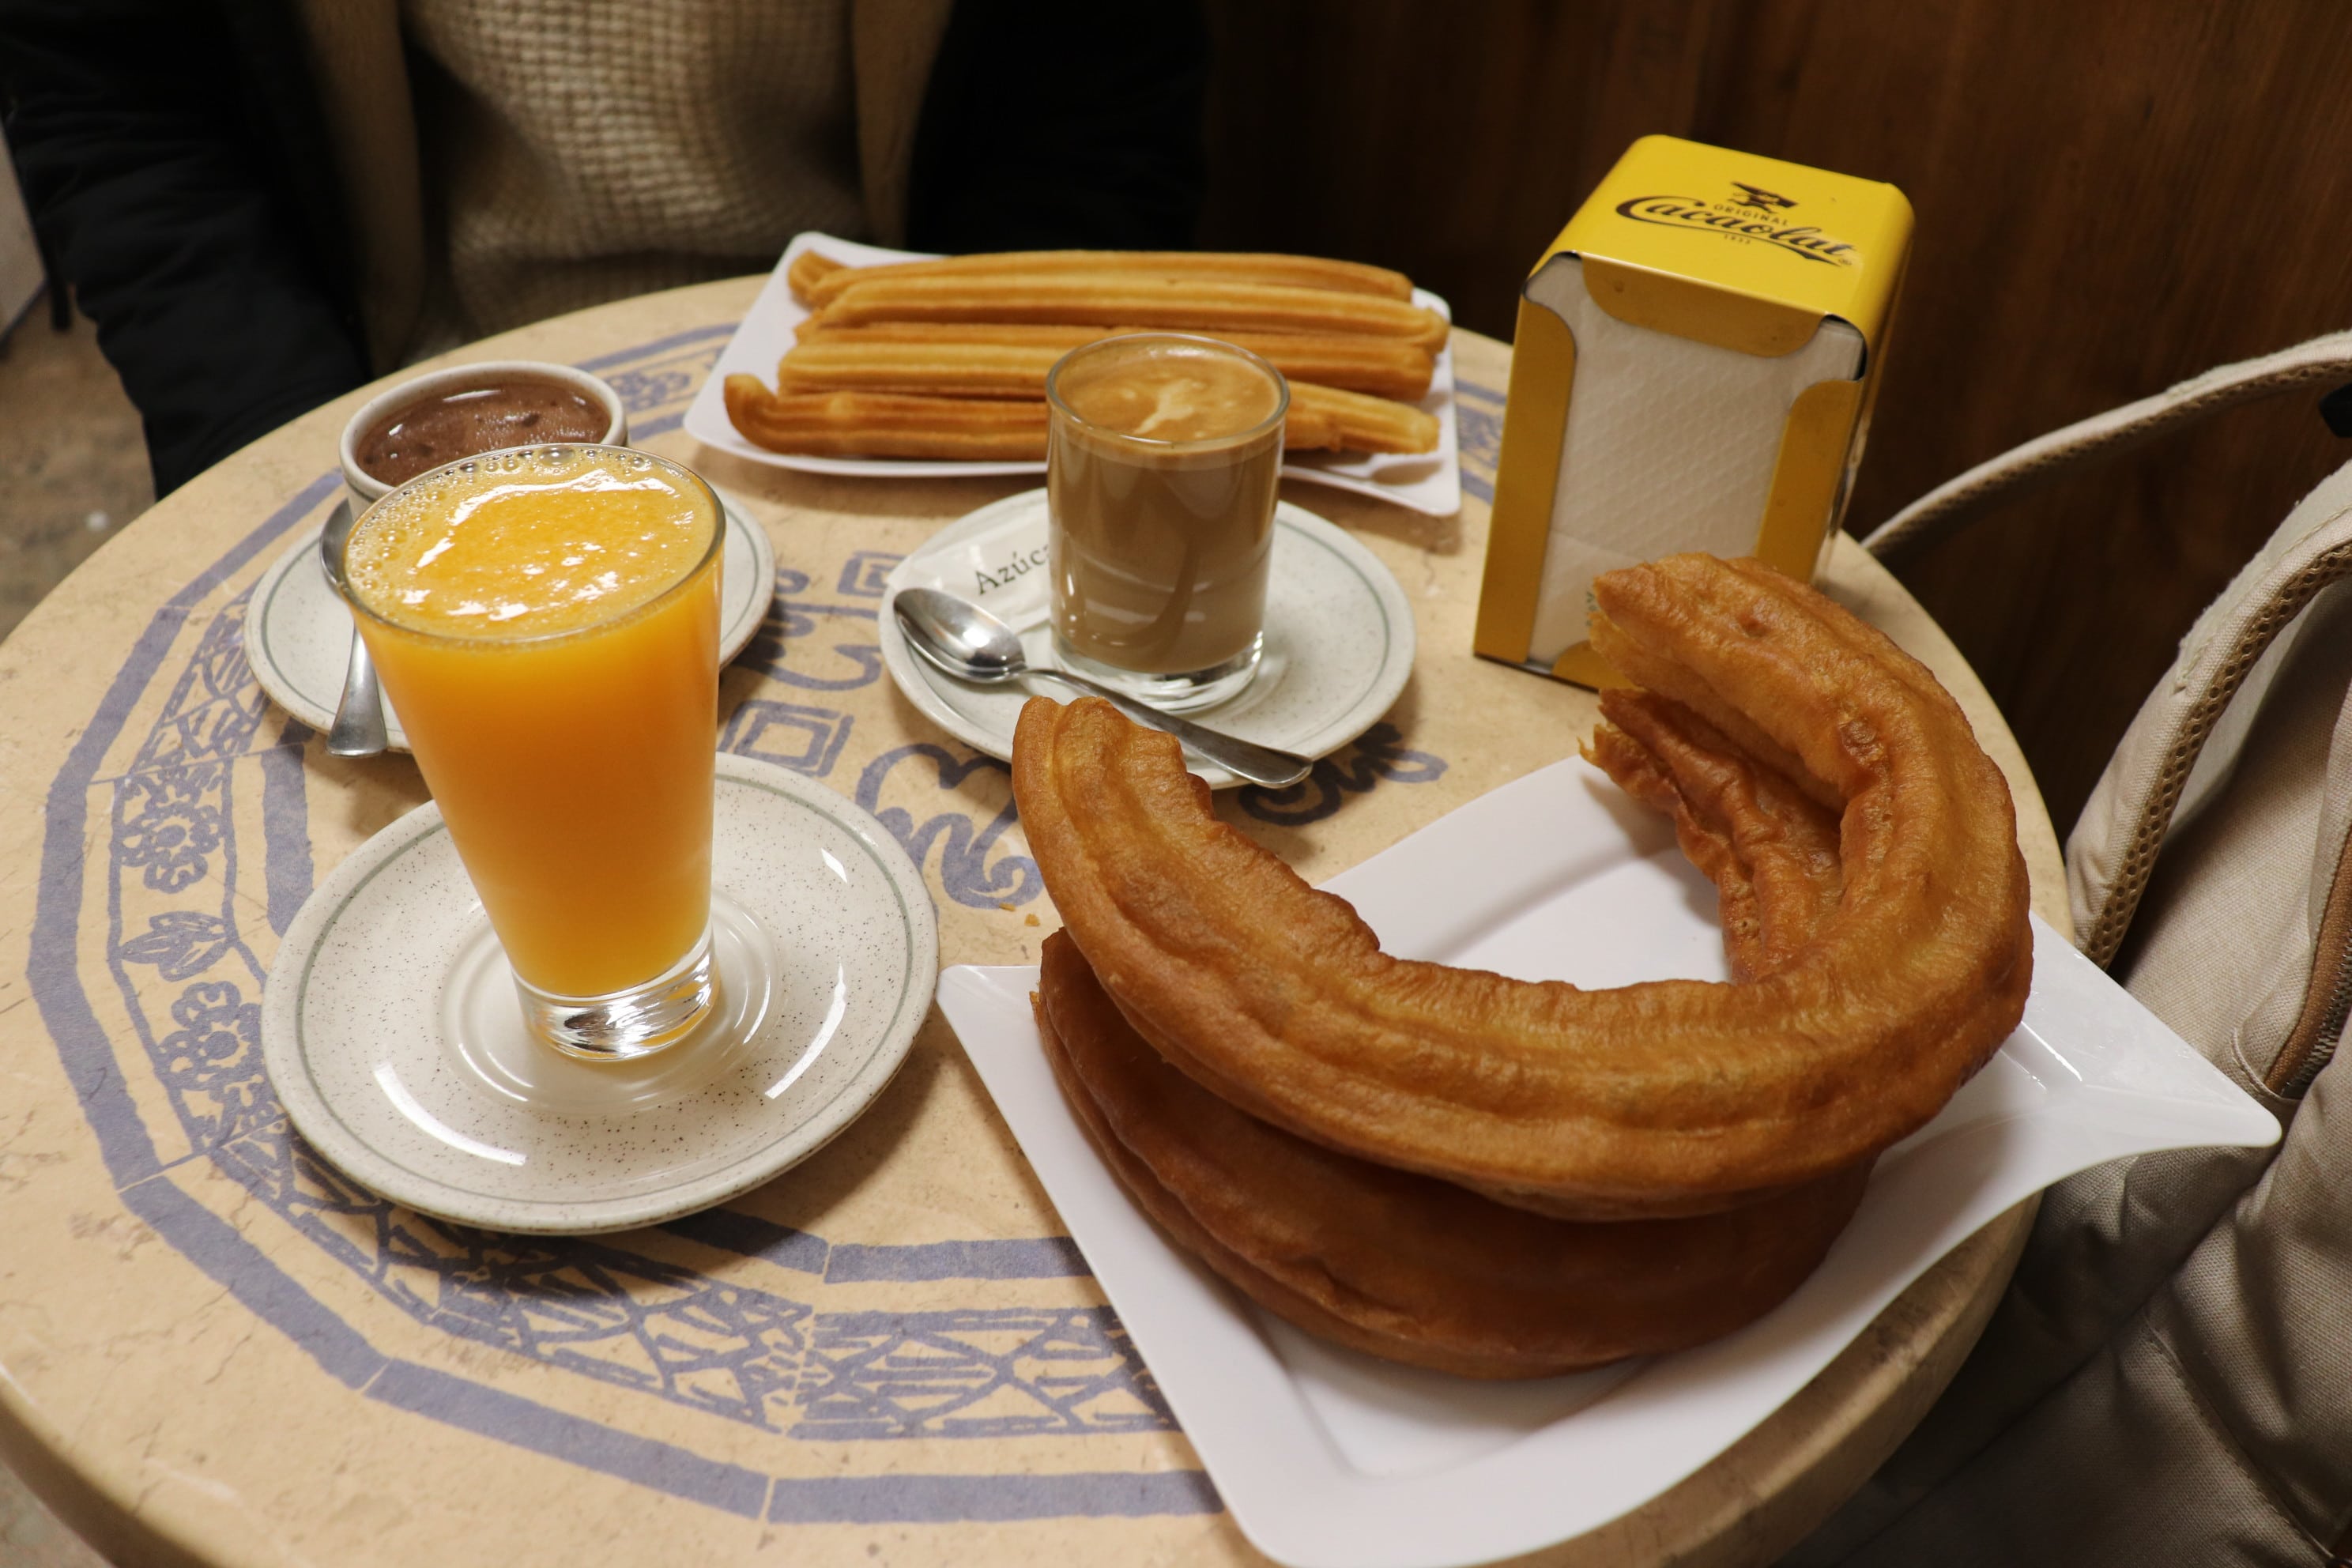 typical Spanish breakfast: churros and chocolate